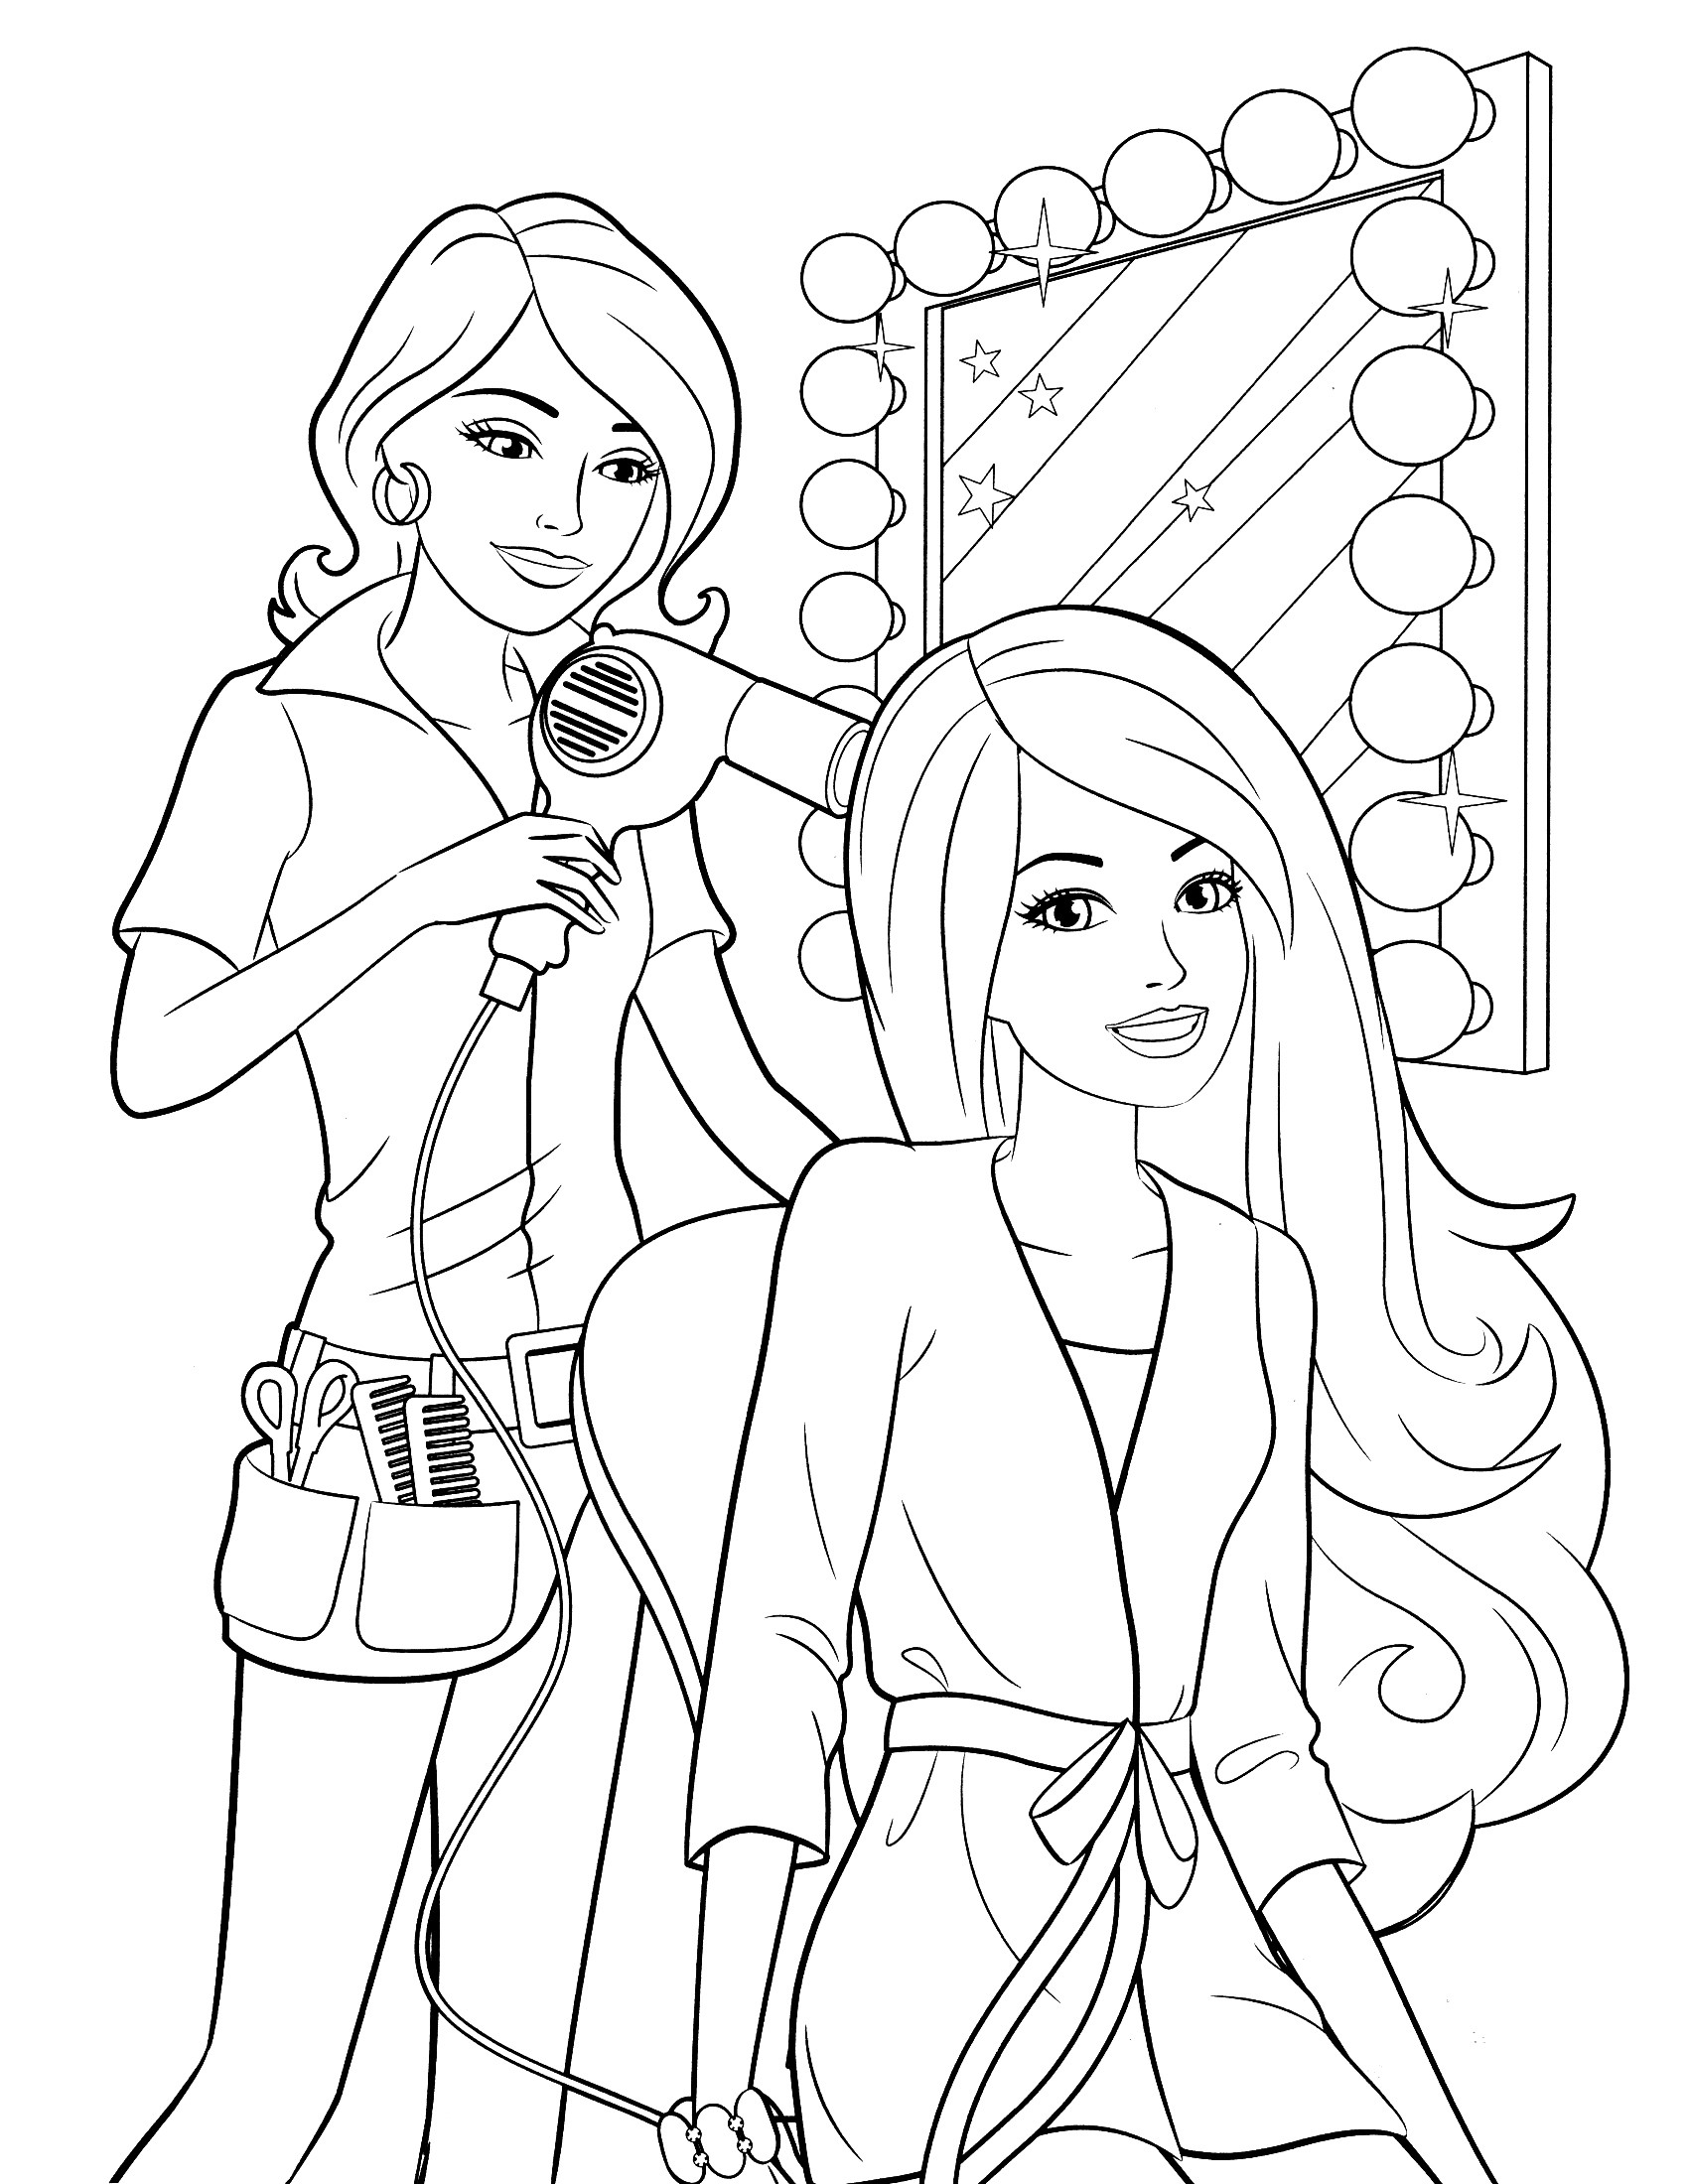 Coloring Pages For Girl Printable
 Coloring Pages for Girls Best Coloring Pages For Kids